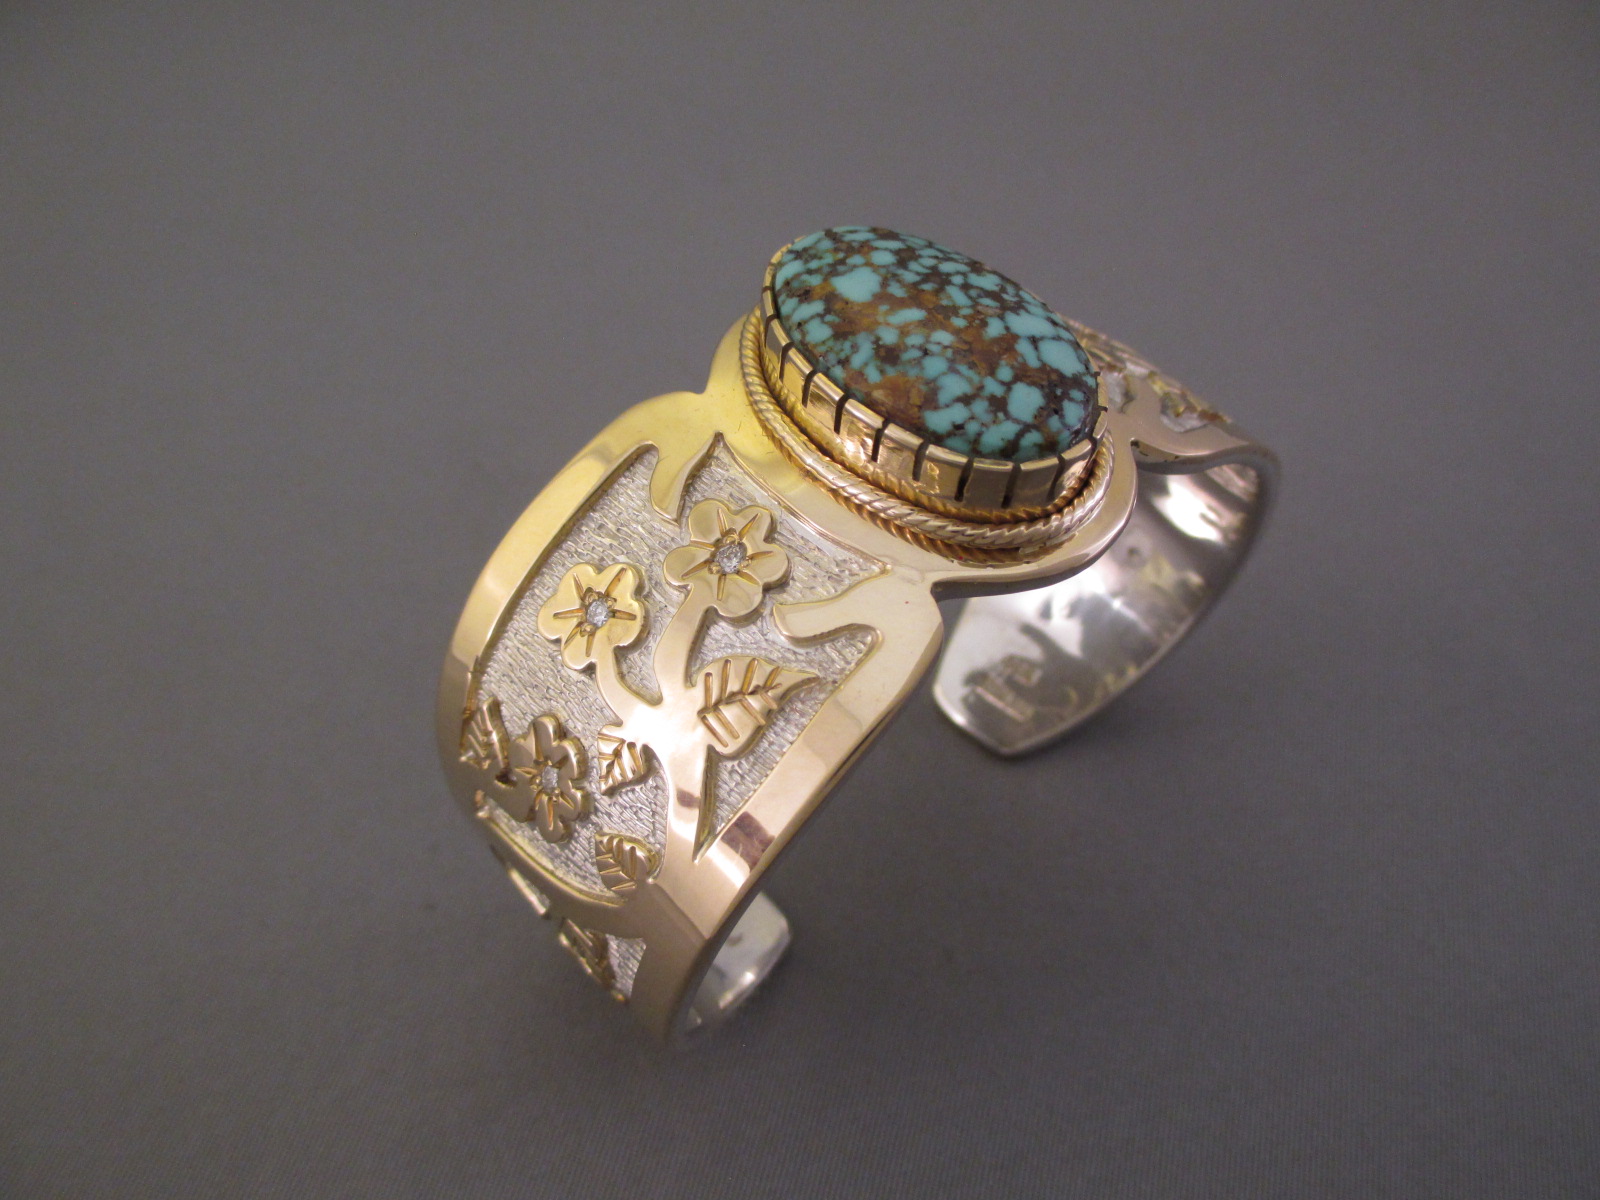 Gold & Silver Cuff Bracelet with Candelaria Turquoise & Diamonds by Native American jewelry artist, Fortune Huntinghorse $3,300-